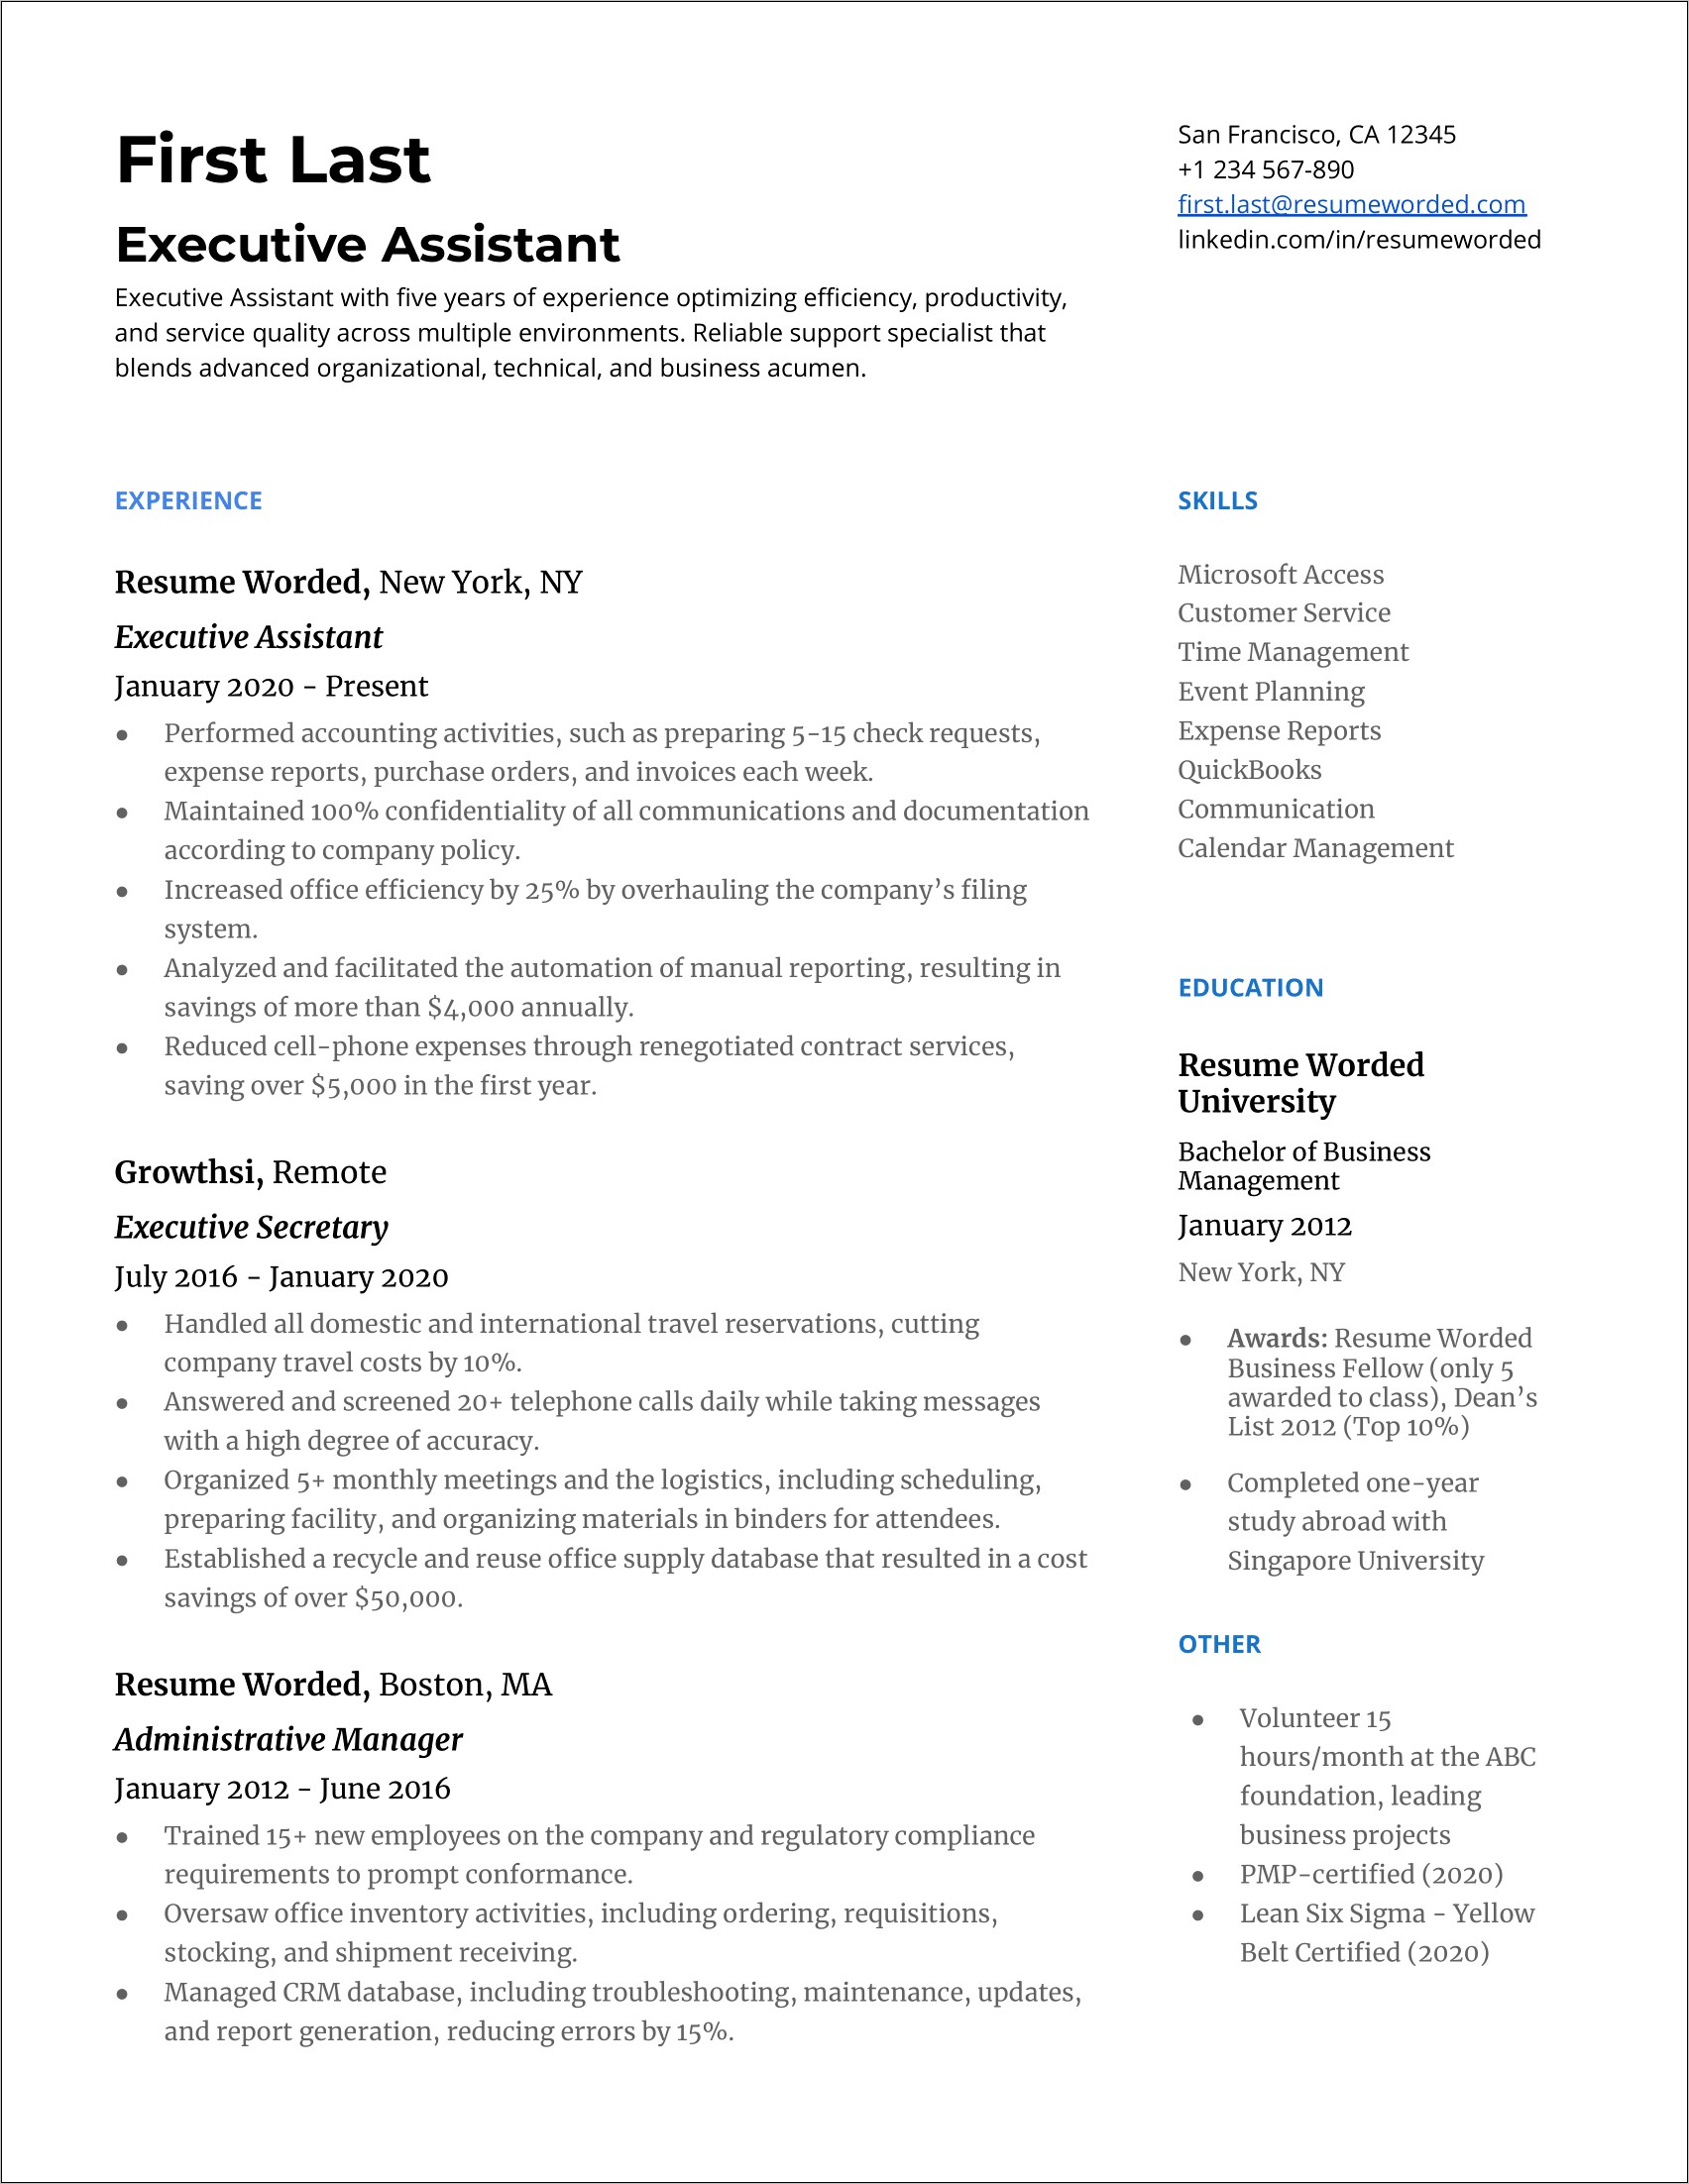 Paying & Receiving Assistant Resume Examples